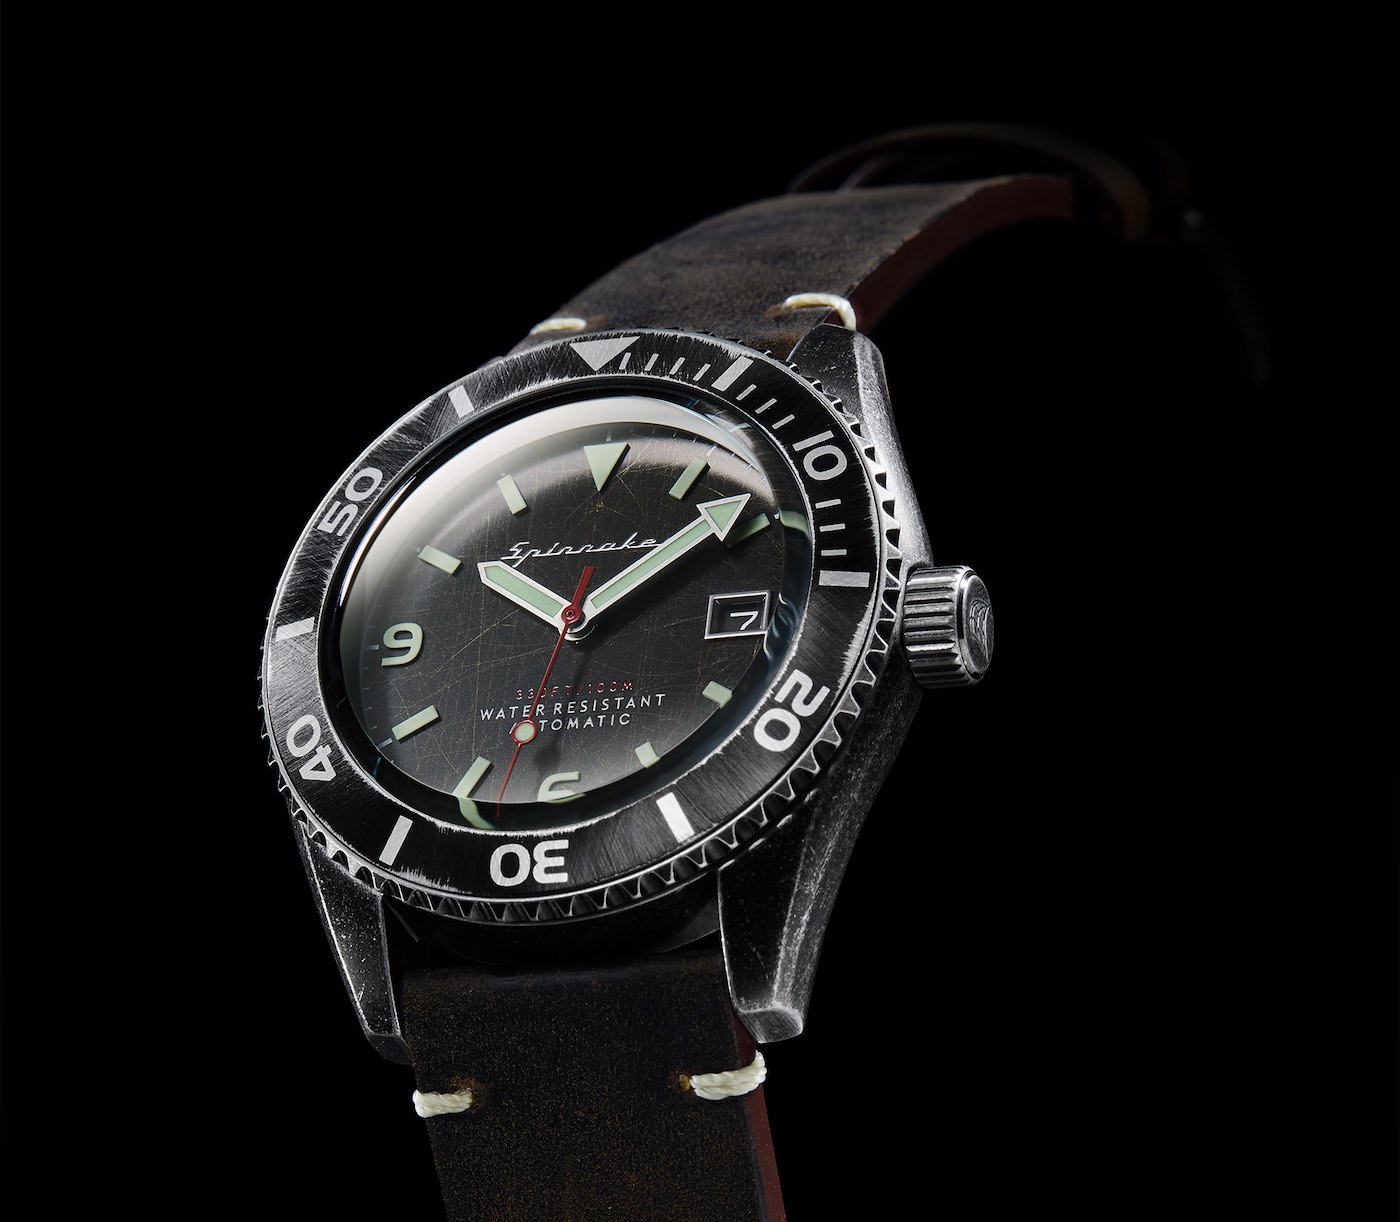 Introducing The Spinnaker Wreck Watch Collection | aBlogtoWatch